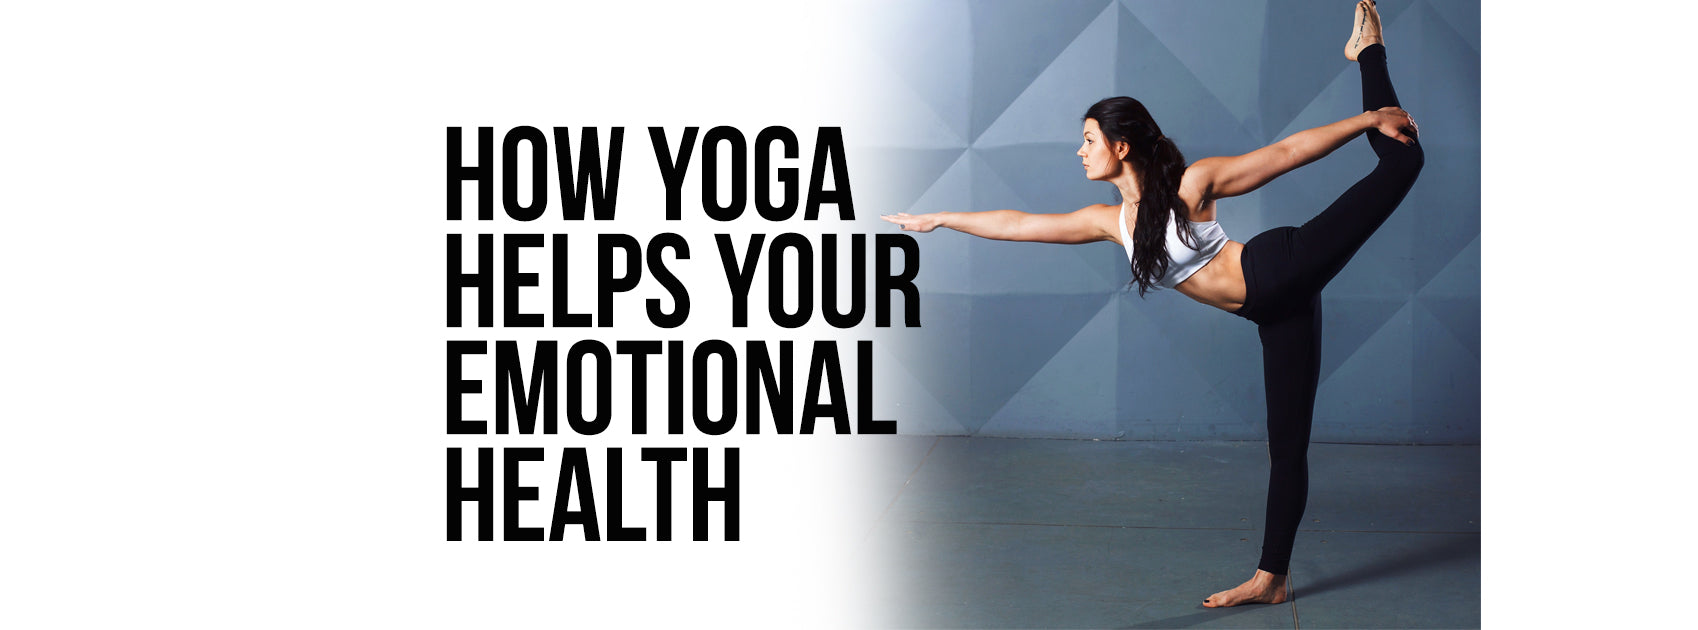 How does Yoga Helps Your Emotional Health